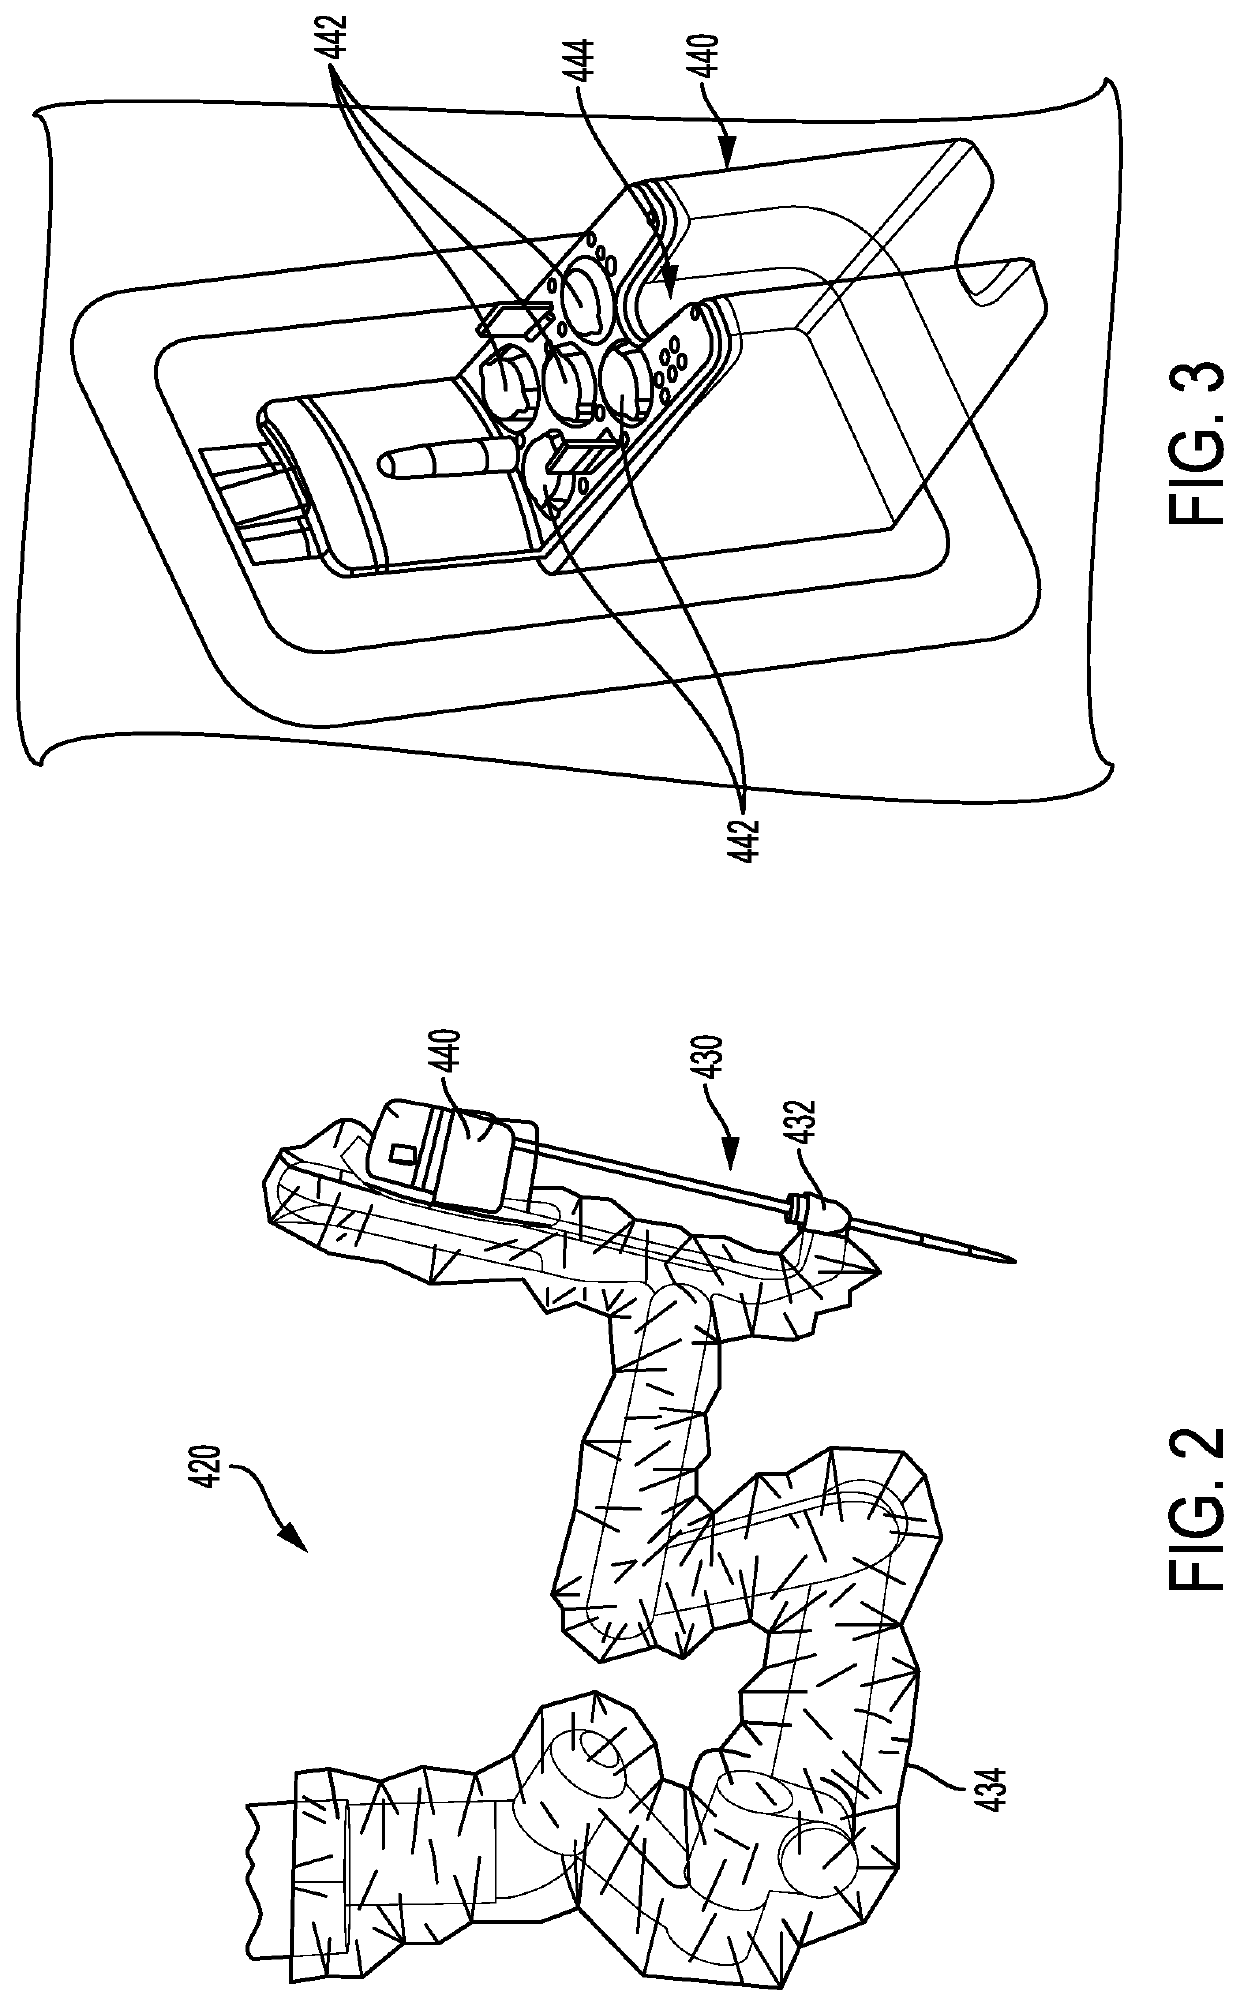 Activating and rotating surgical end effectors